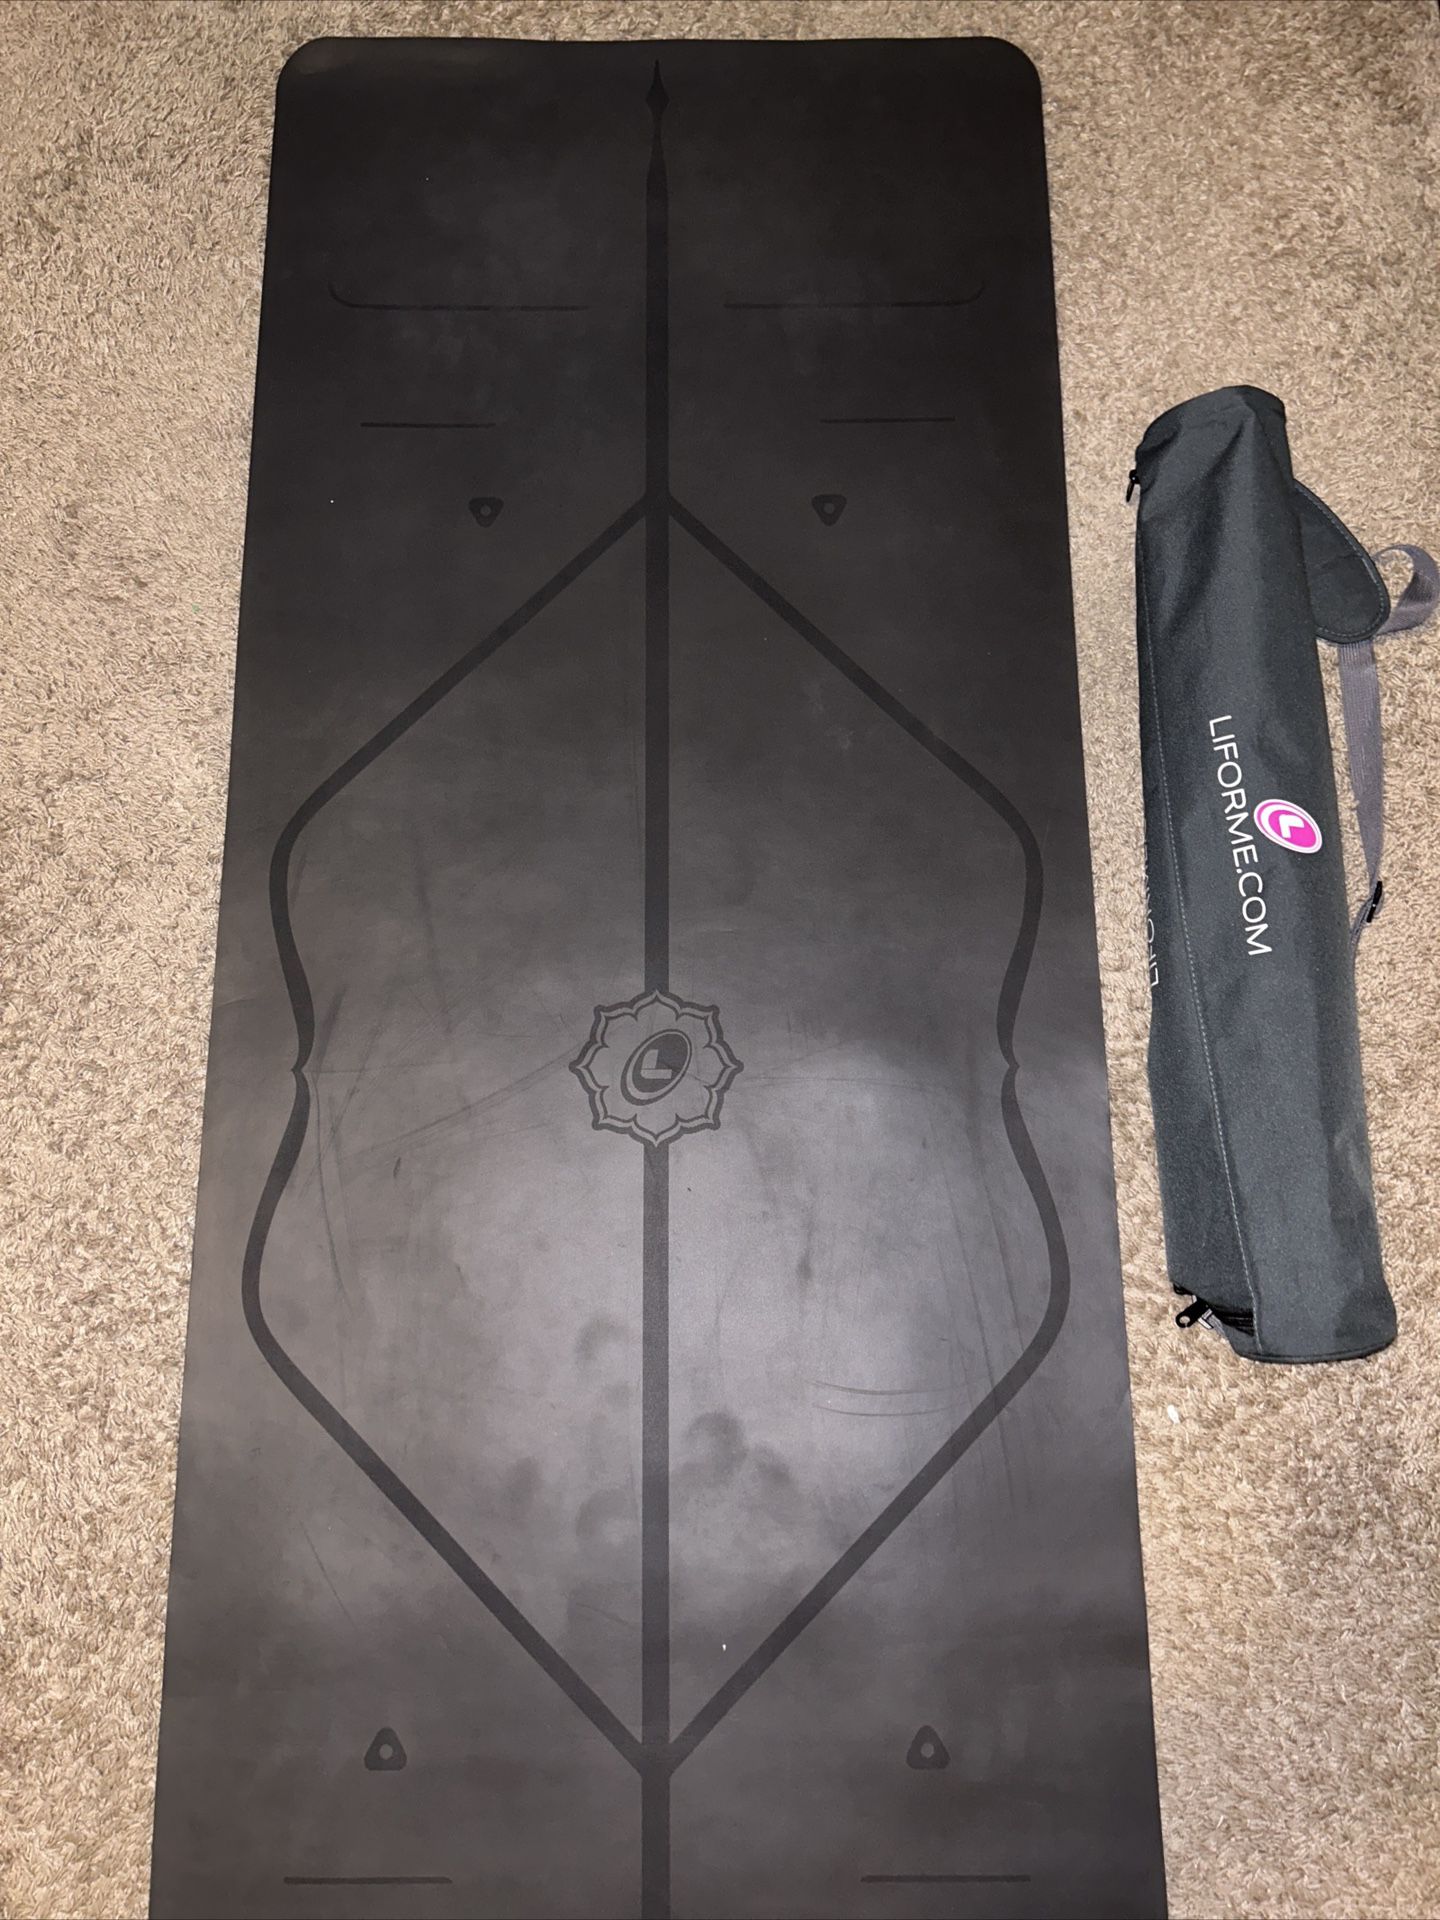 Blue/gray Liforme Yoga Mat With Alignment And Yoga Bag for Sale in